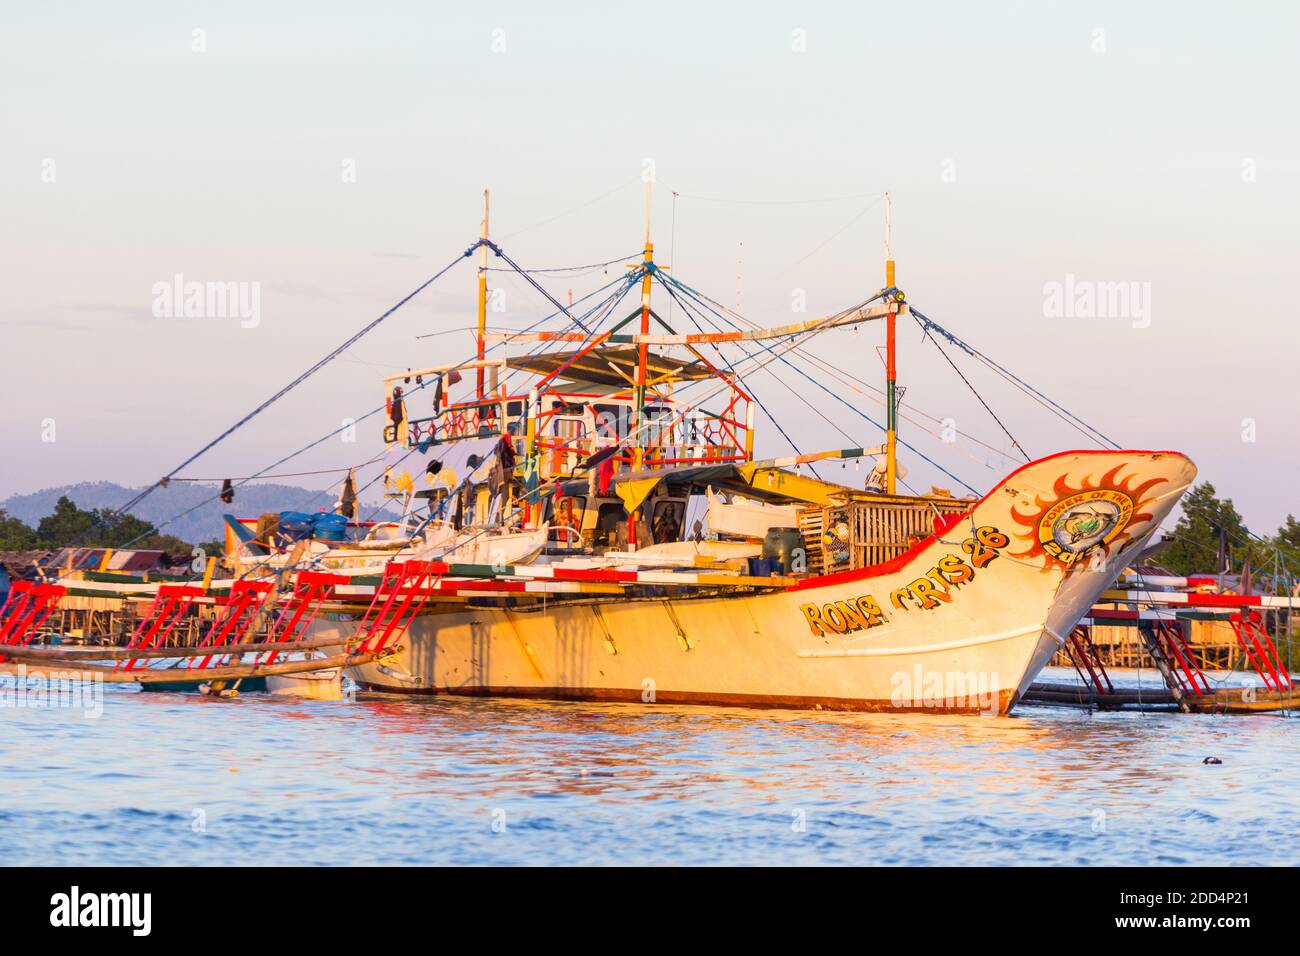 A fishing boat docked at the pier of Pagadian City, Philippines Stock Photo